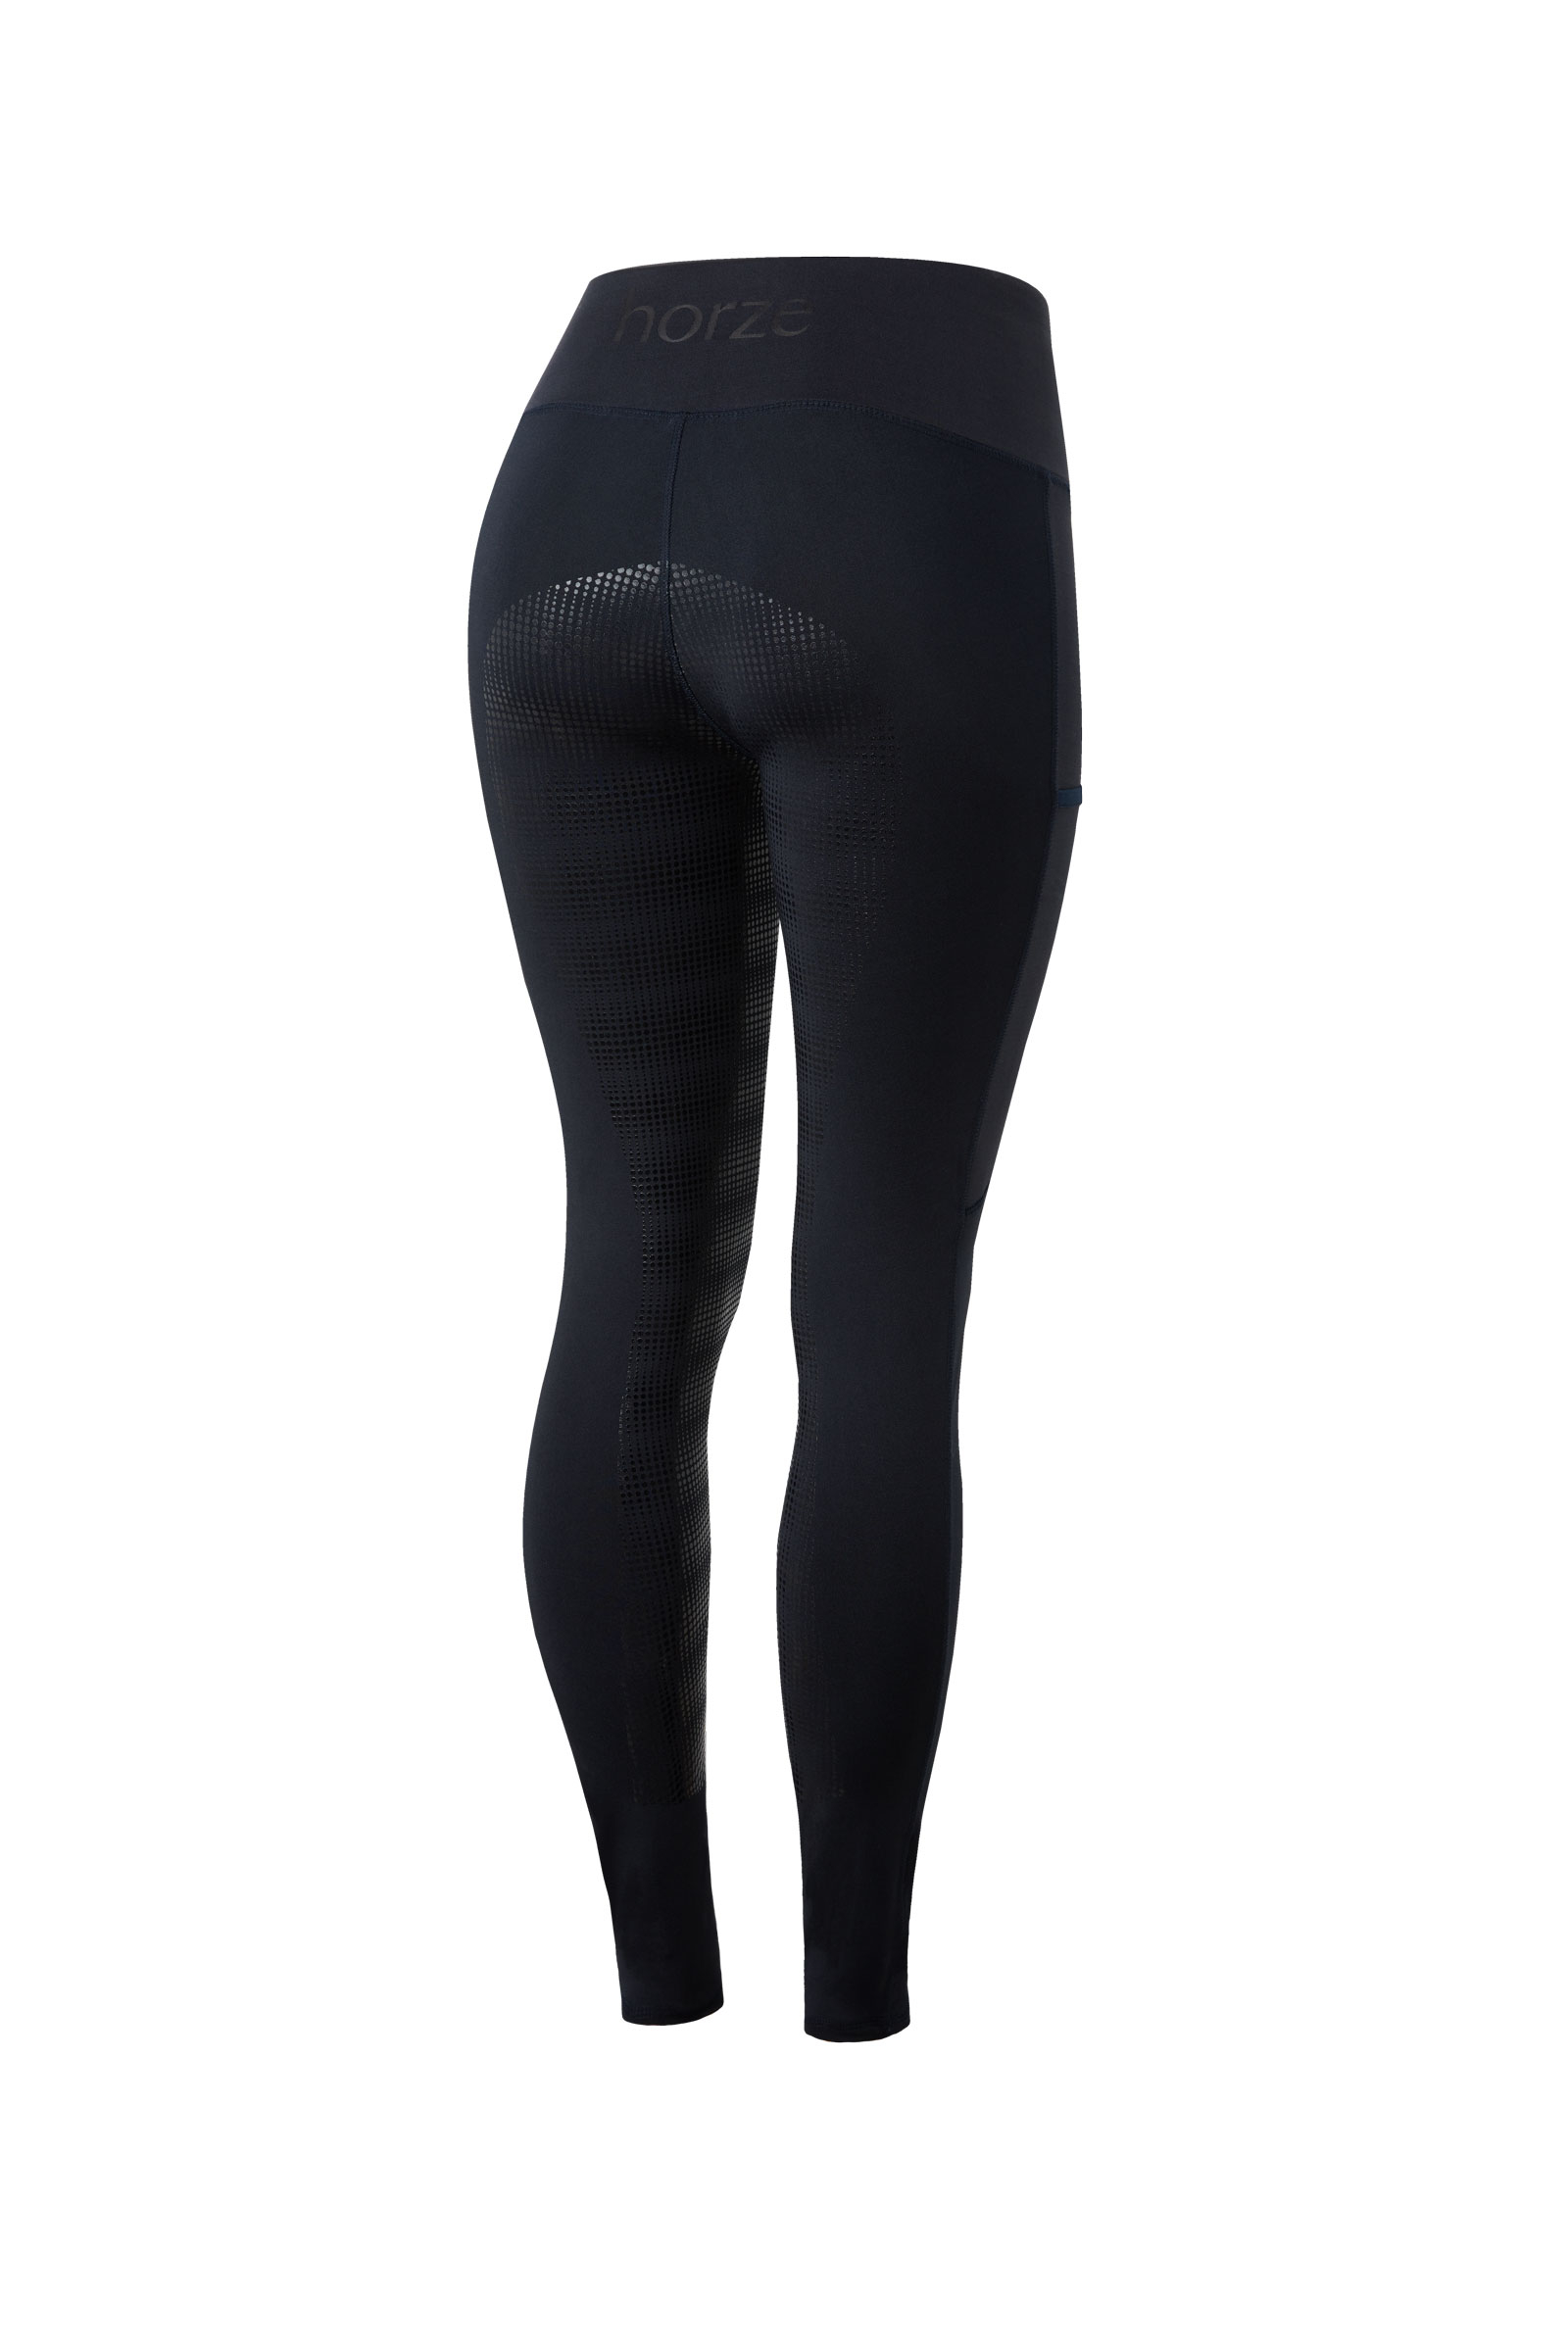 Horze Women's Silicone Full Seat Riding Tights with Phone Pocket